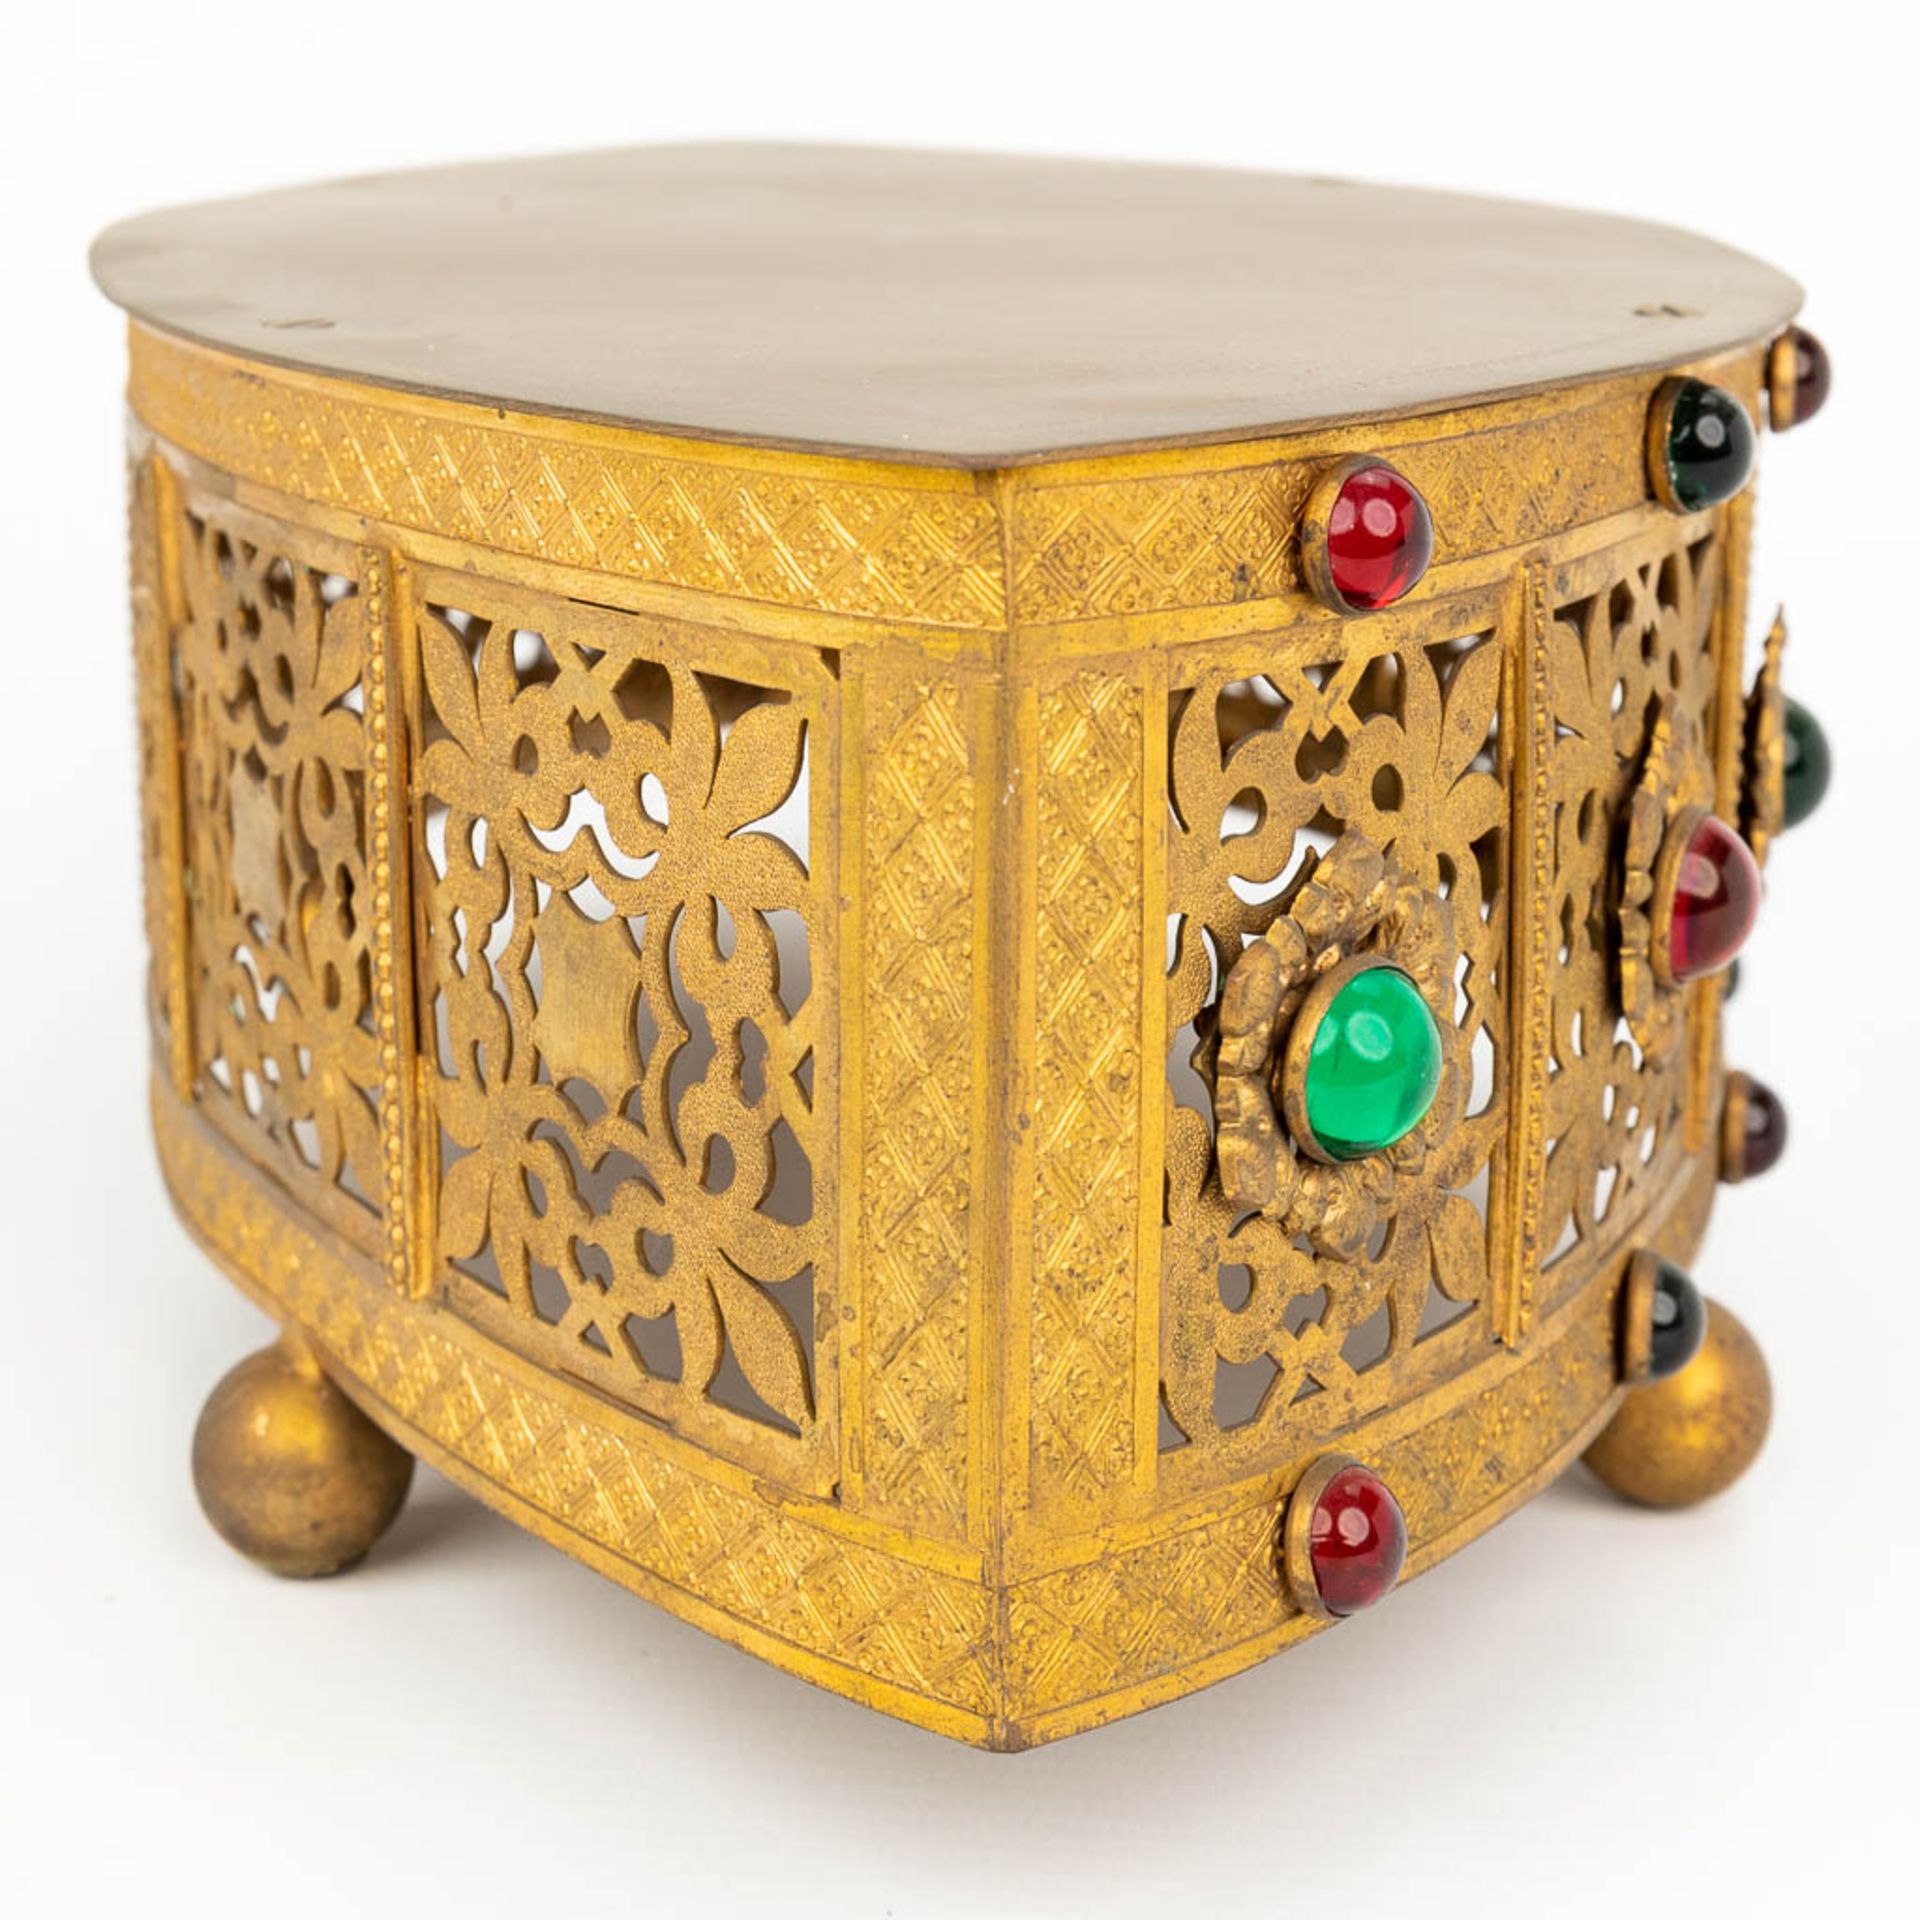 A neogothic base made of brass and decorated with cloisonné enamel and cabochons. (H:11cm) - Image 9 of 11